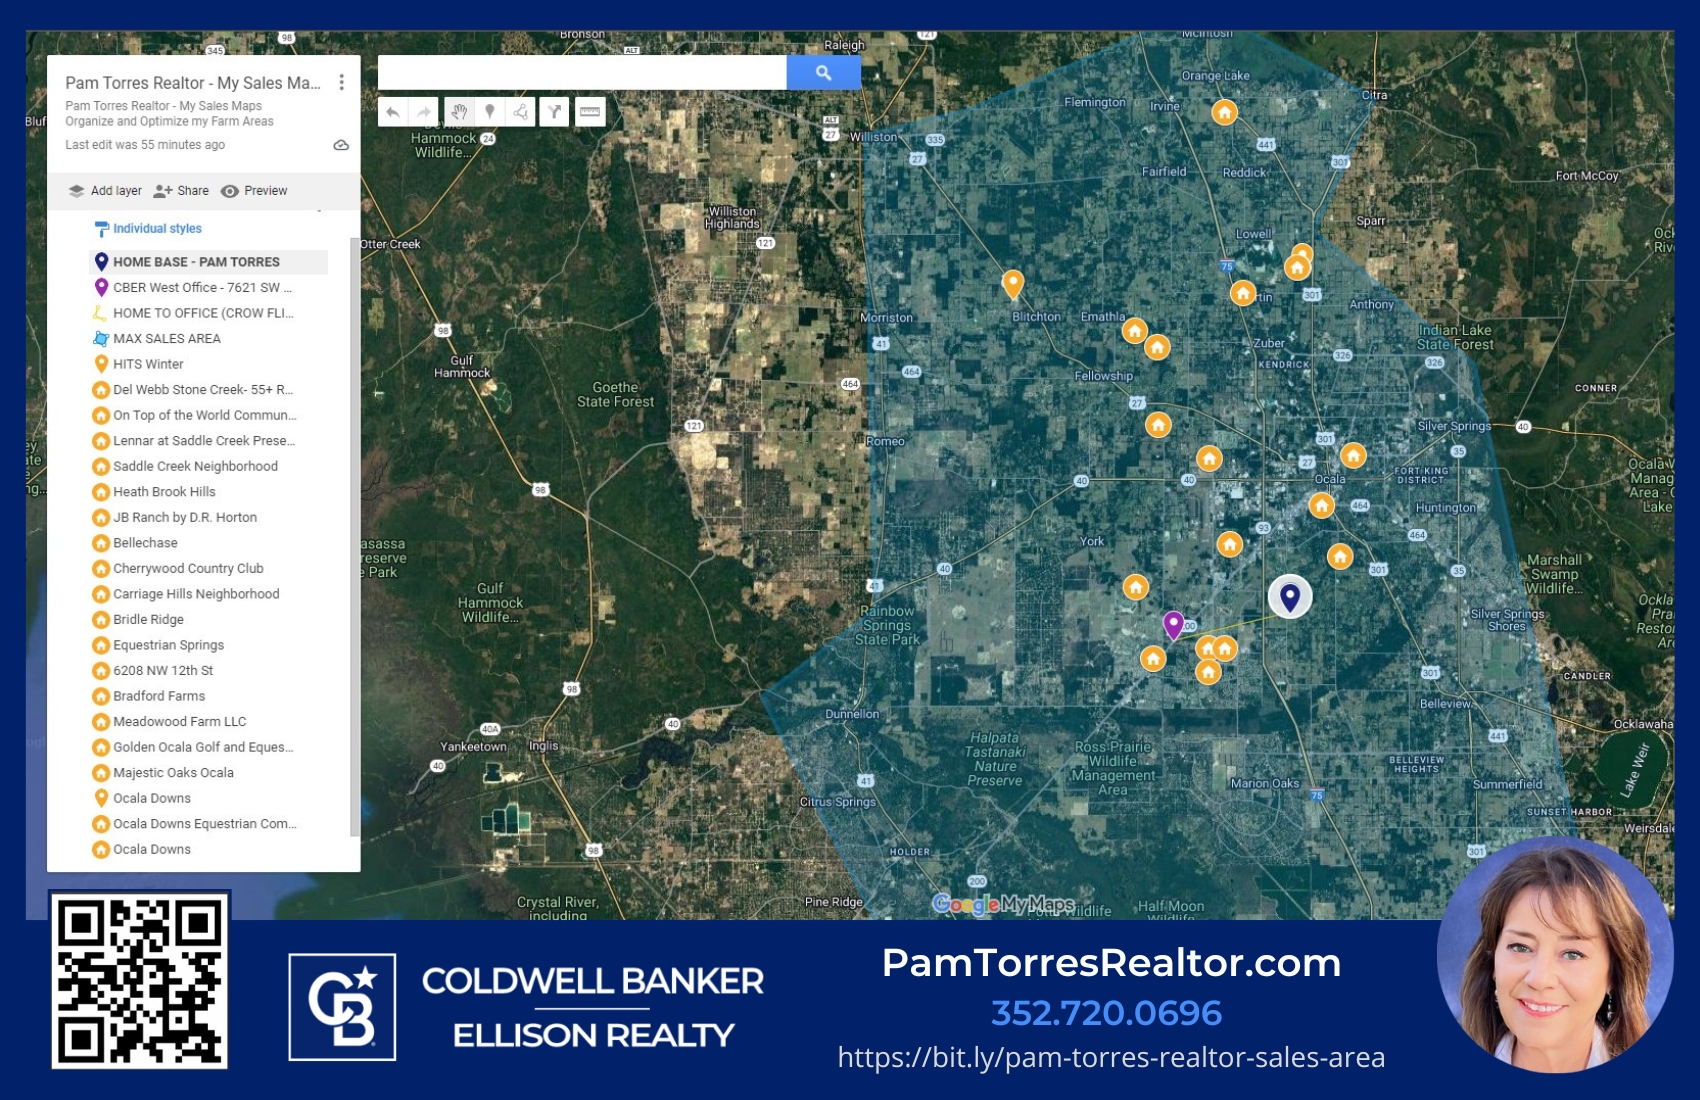 Pam Torres Realtor - My Sales Area - GOOGLE MY MAPS 11x17 ps